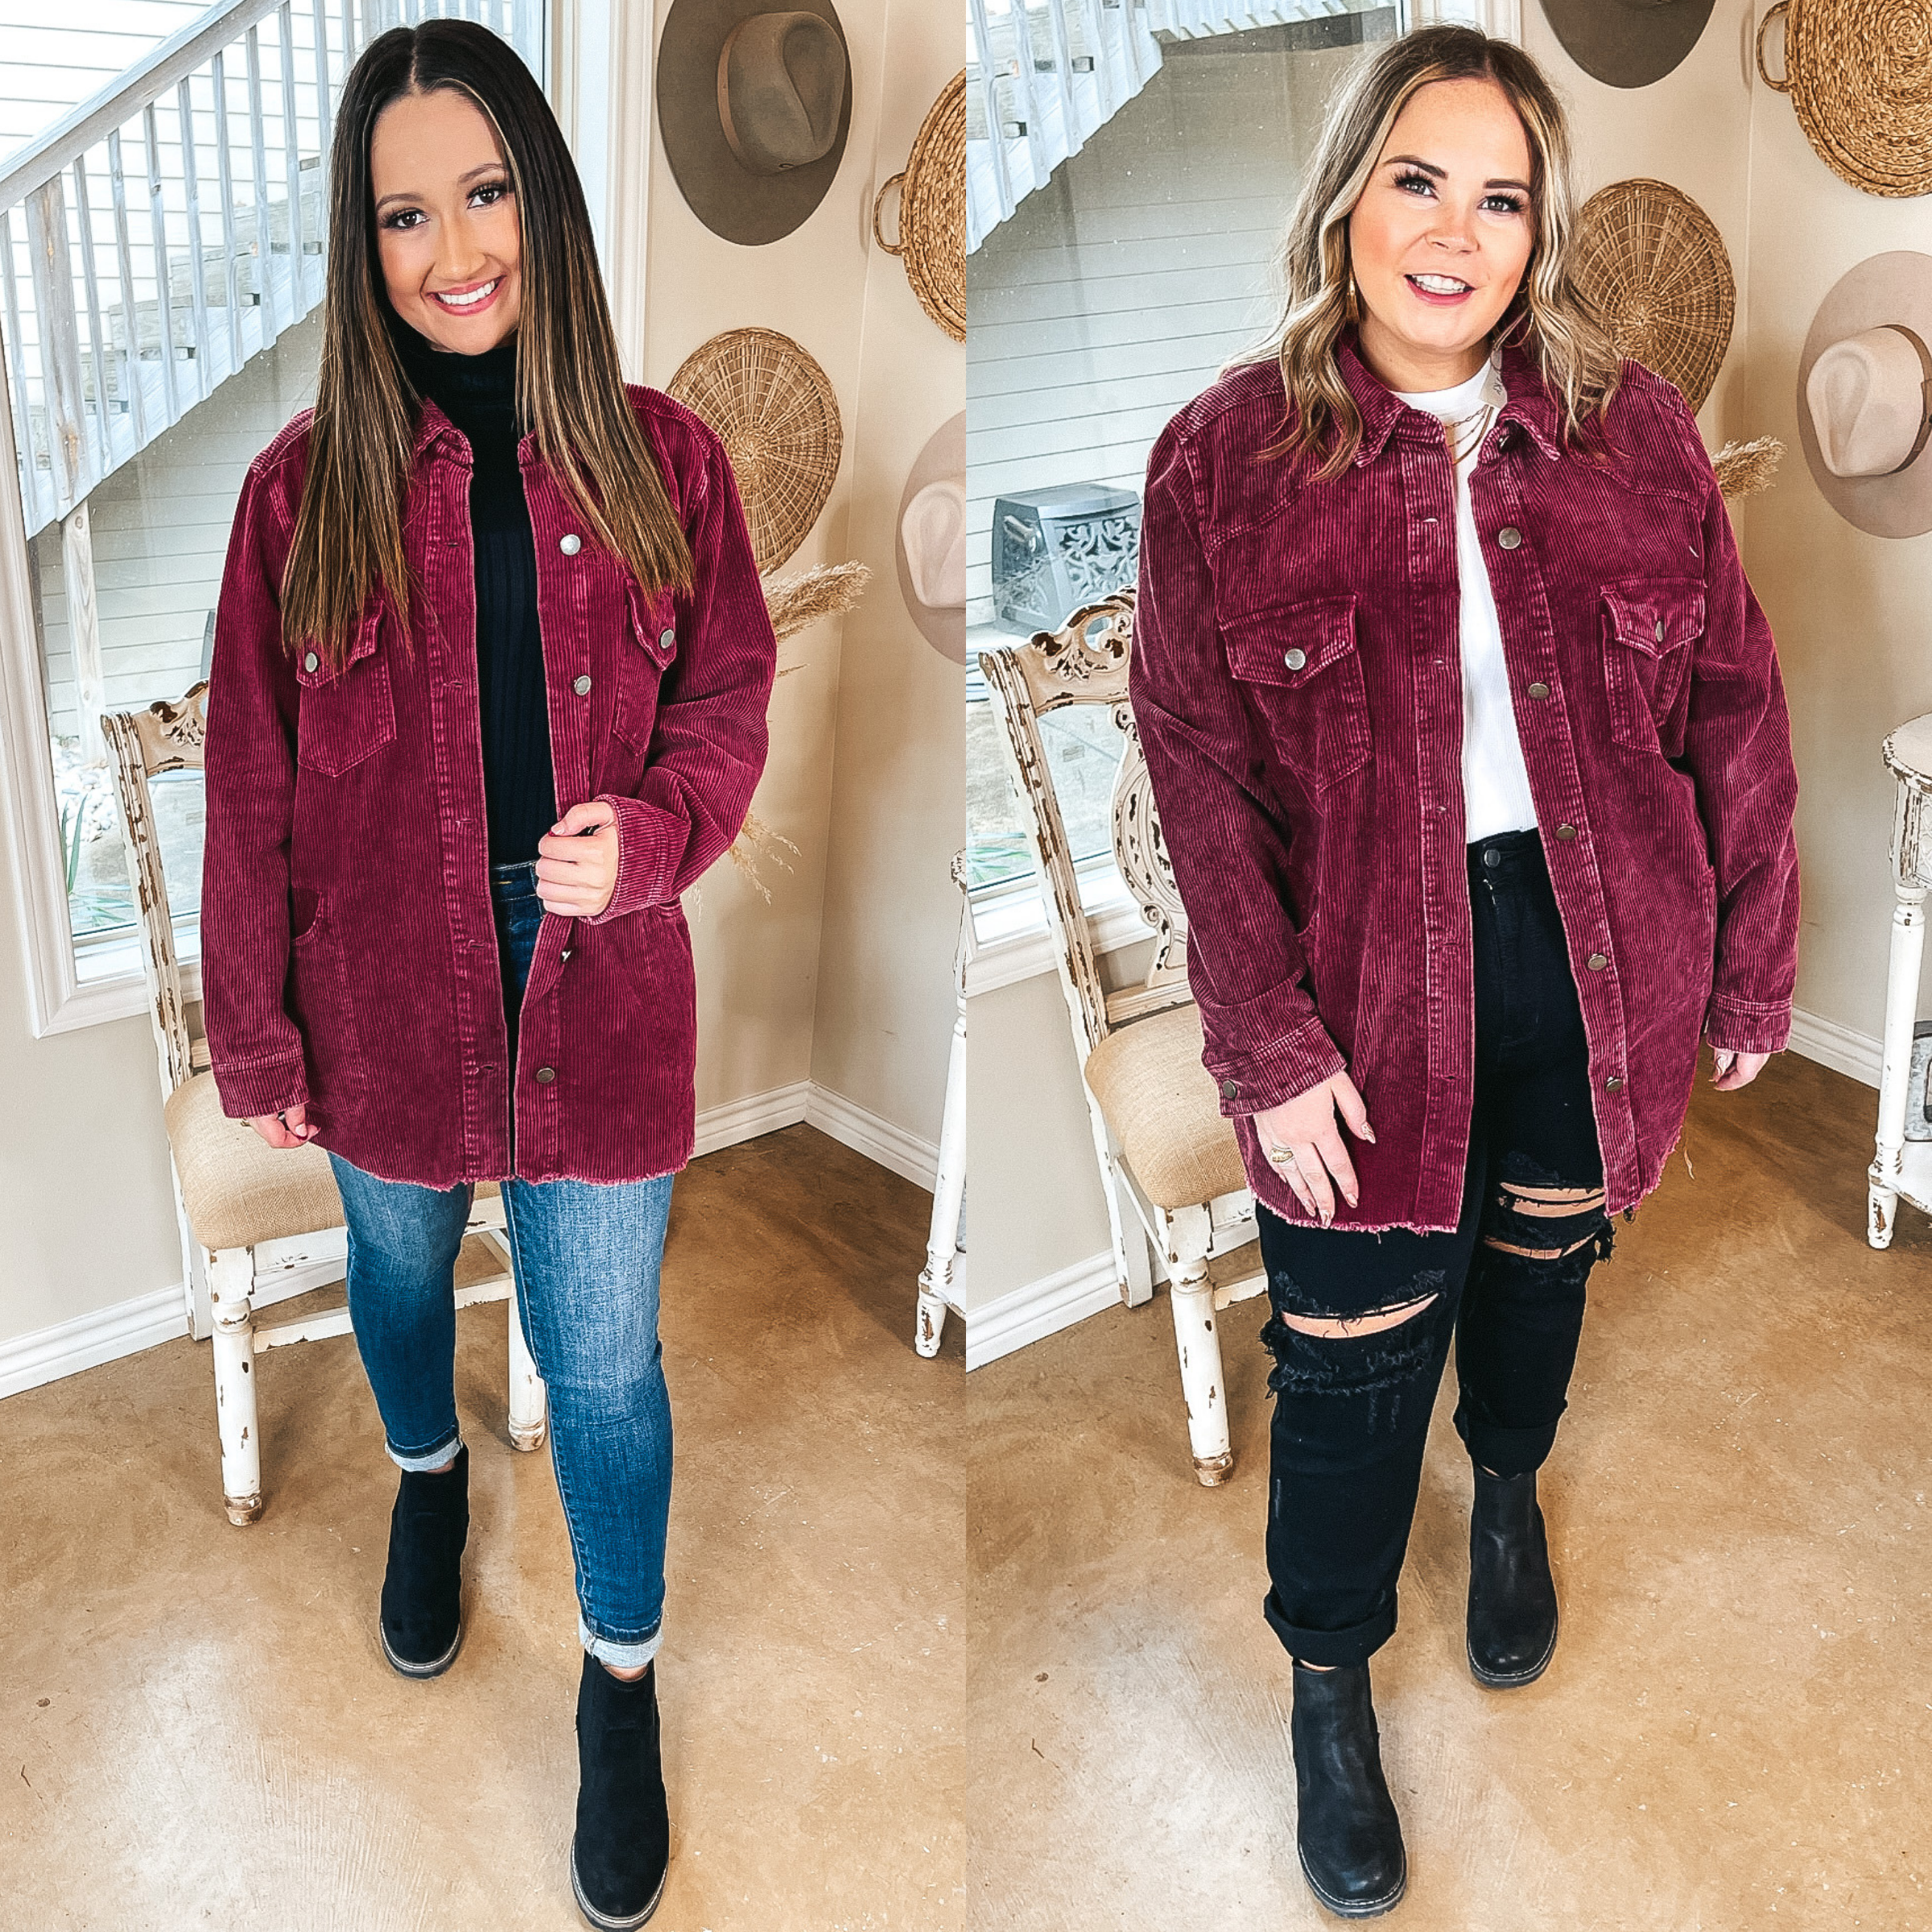 Models are wearing a long button up shacket that is a maroon corduroy material. Size small model is wearing a black tank top, skinny jeans, black booties, and gold jewelry. Size large model has it paired with a white tank top, black distressed jeans, black booties, and gold jewelry.